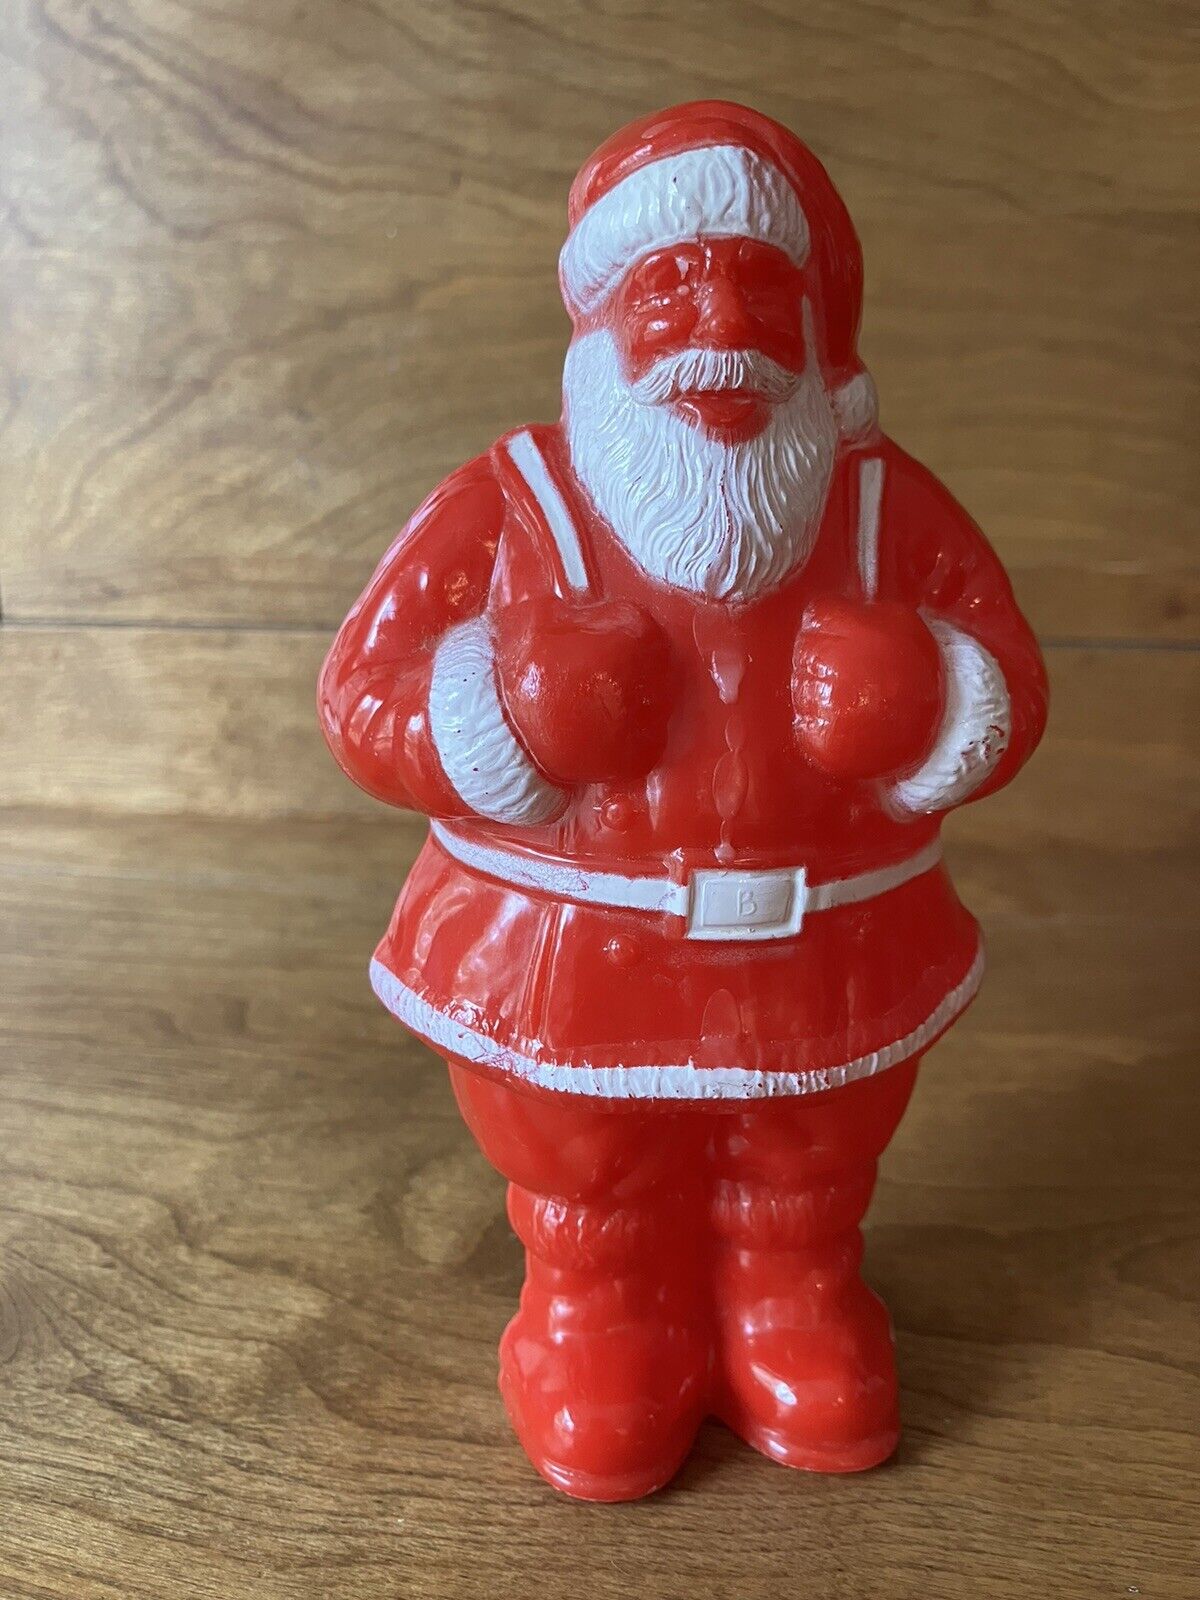 Vintage Irwin Santa Claus red plastic candy container Christmas retro figurine